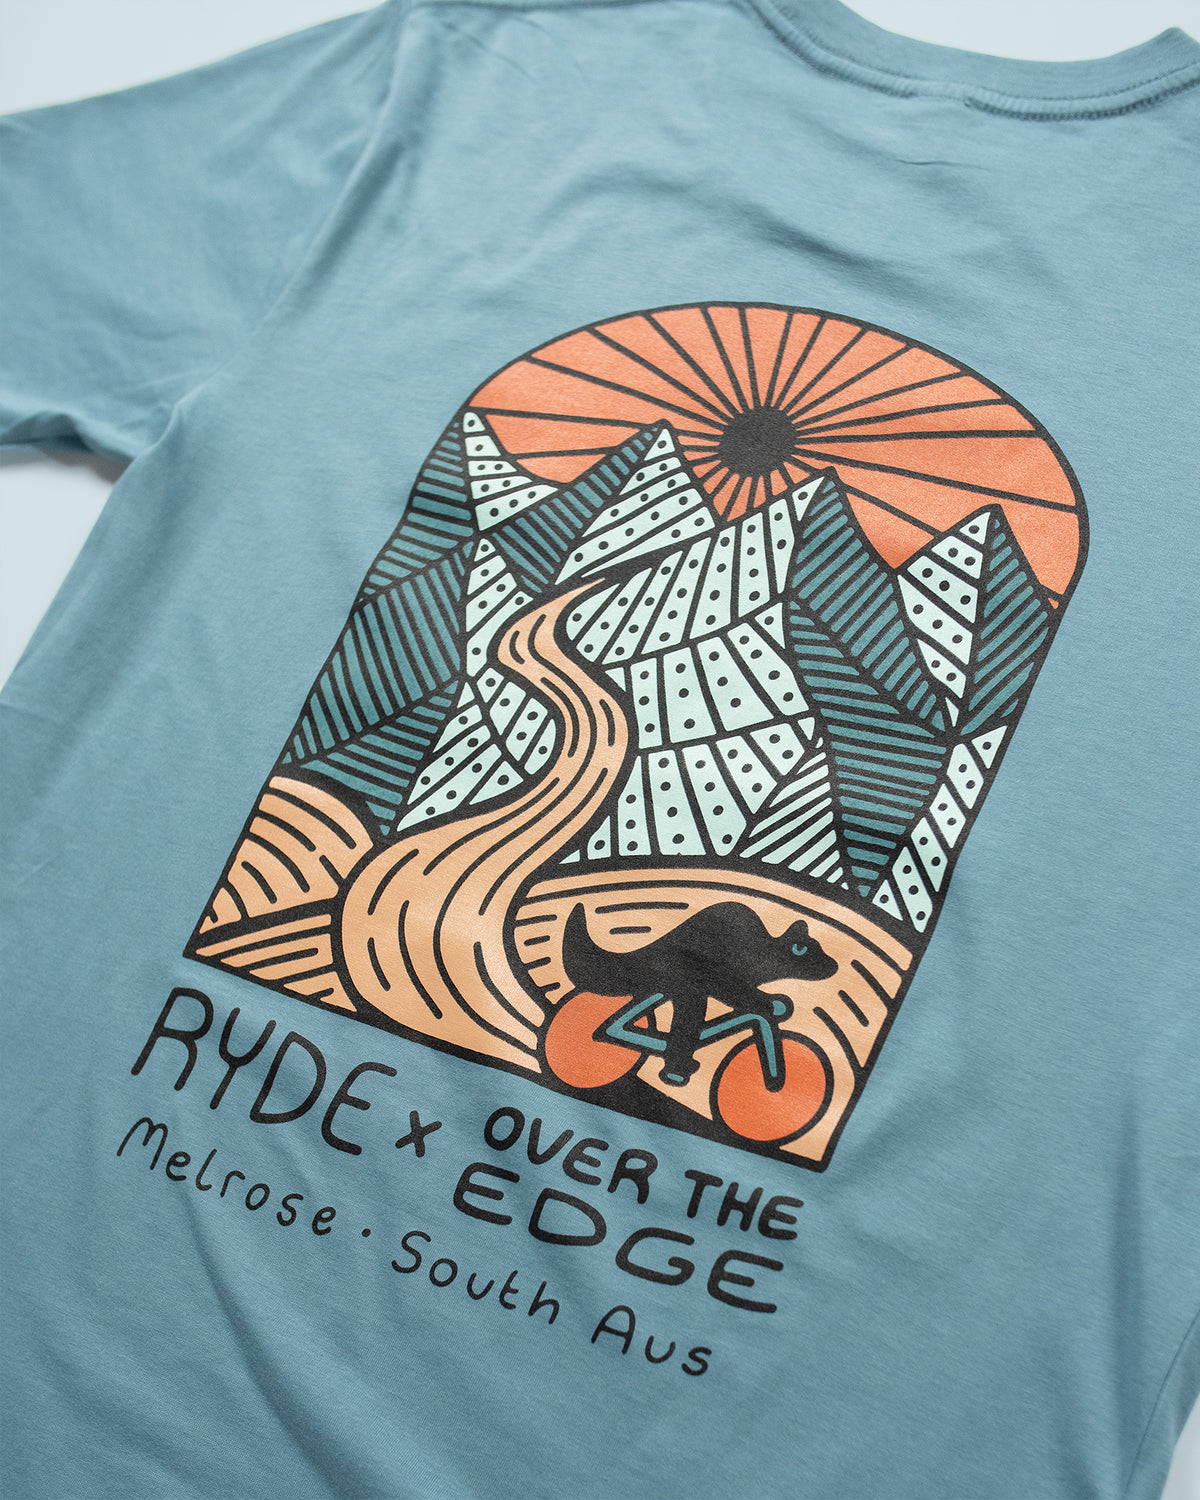 Ryde X Over The Edge Melrose Tee